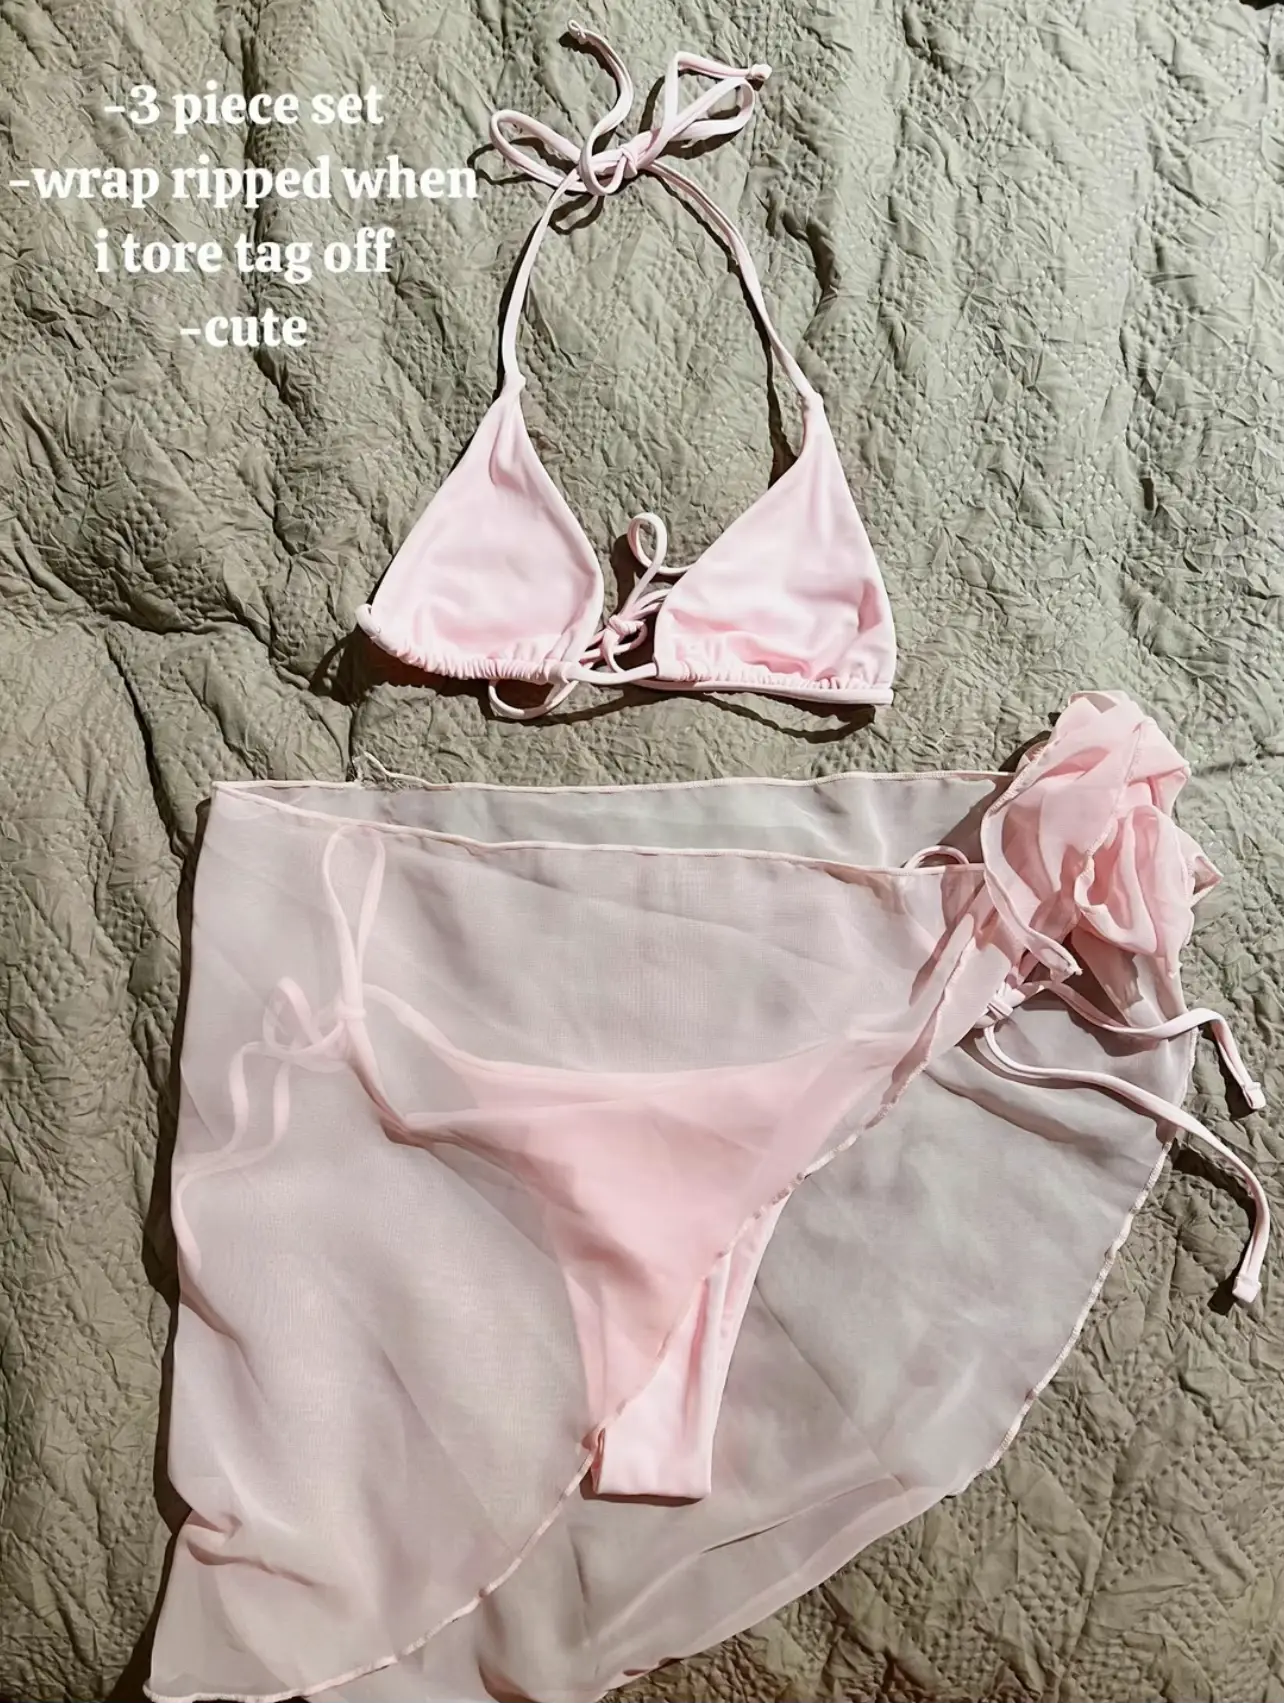 Aerie Full Coverage Bra Tan Size 32 D - $30 (33% Off Retail) New With Tags  - From Lauren